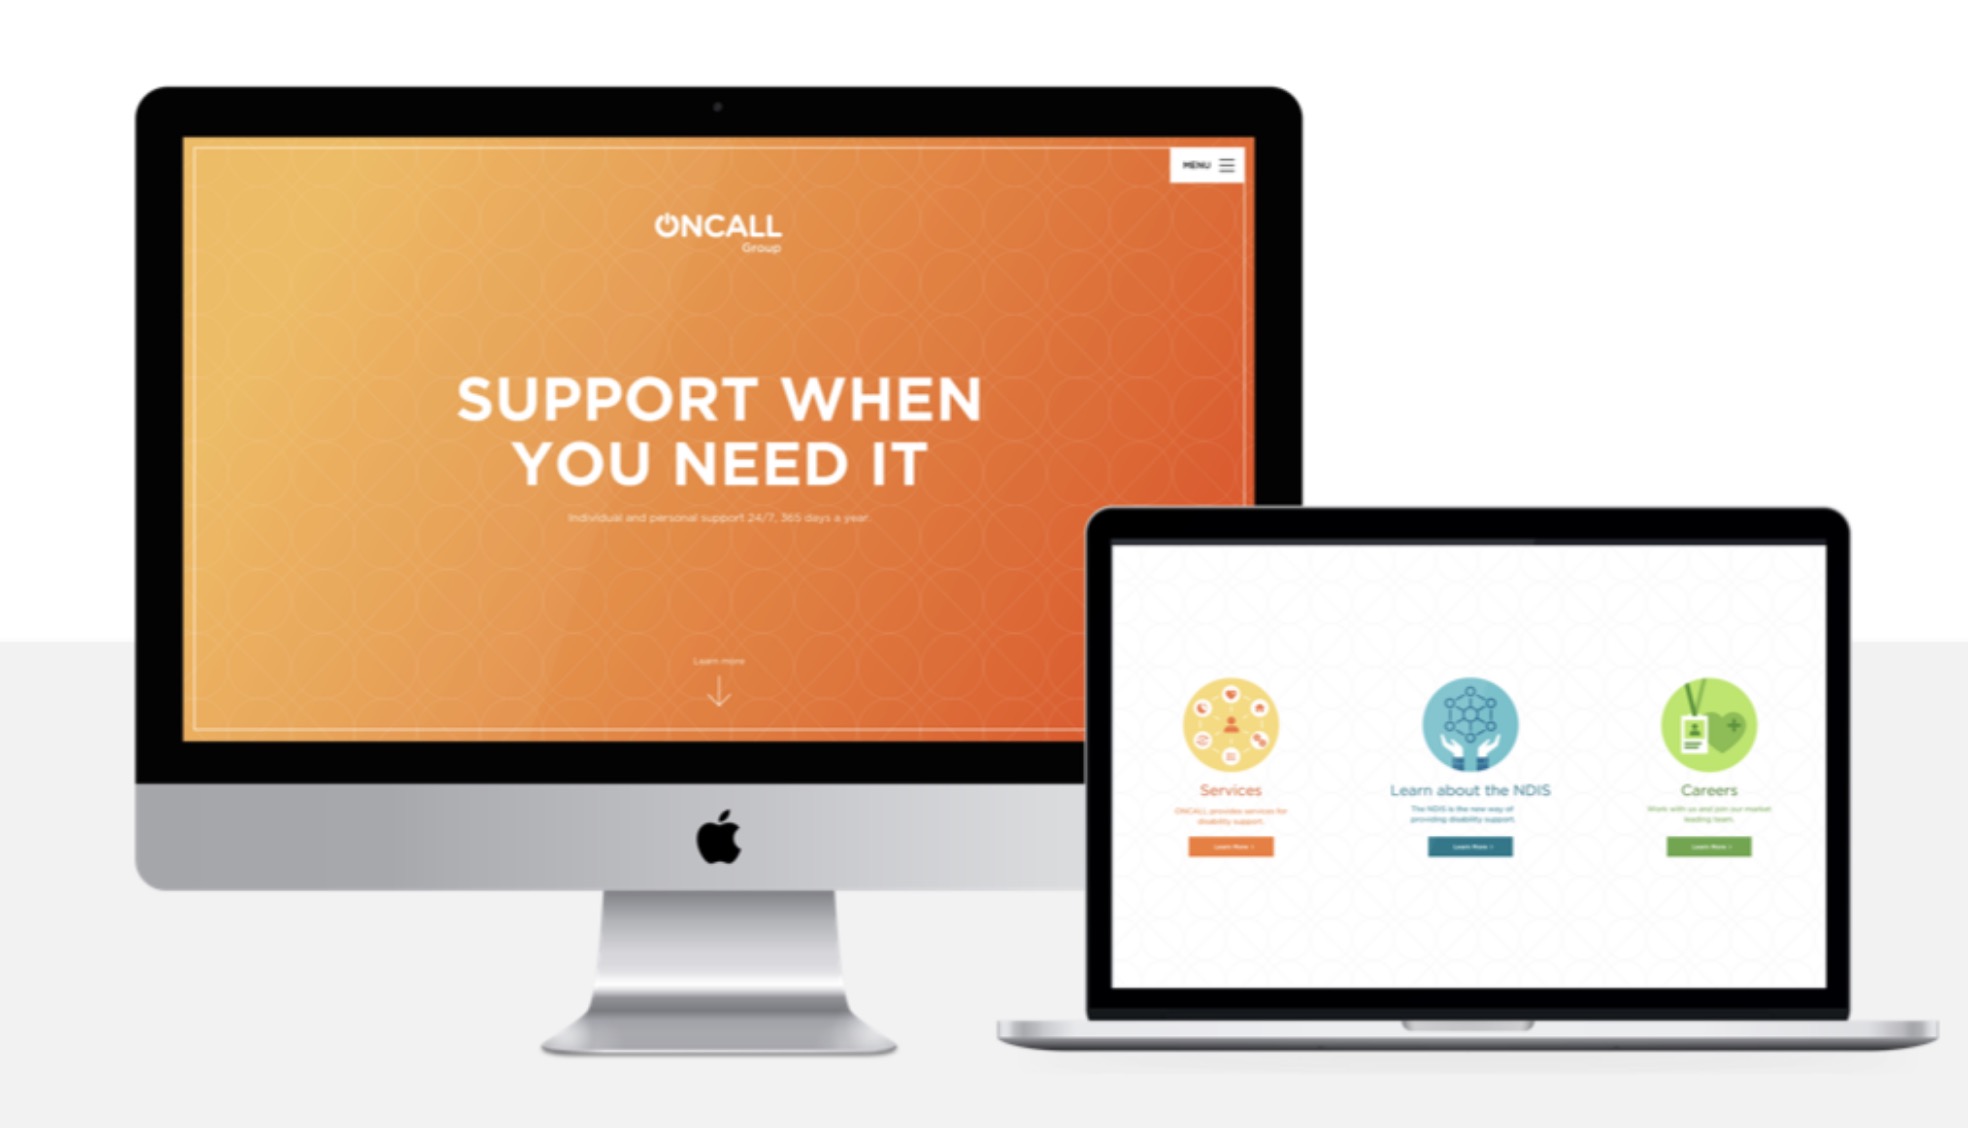 Oncall website preview on PC and laptop